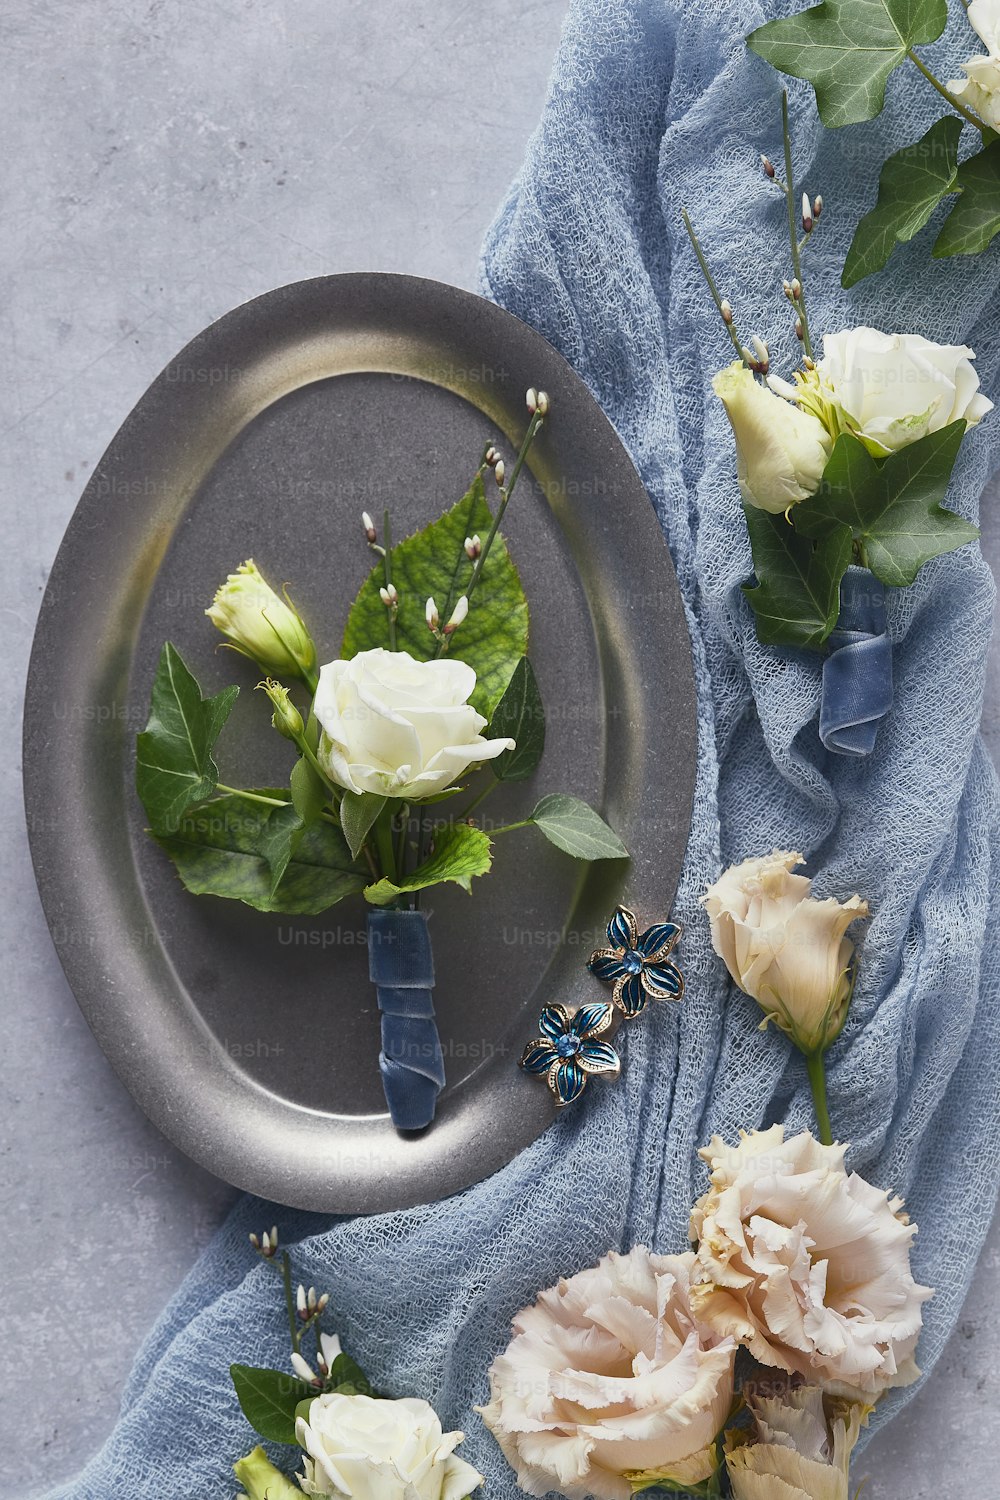 a plate with flowers on it next to a blue towel